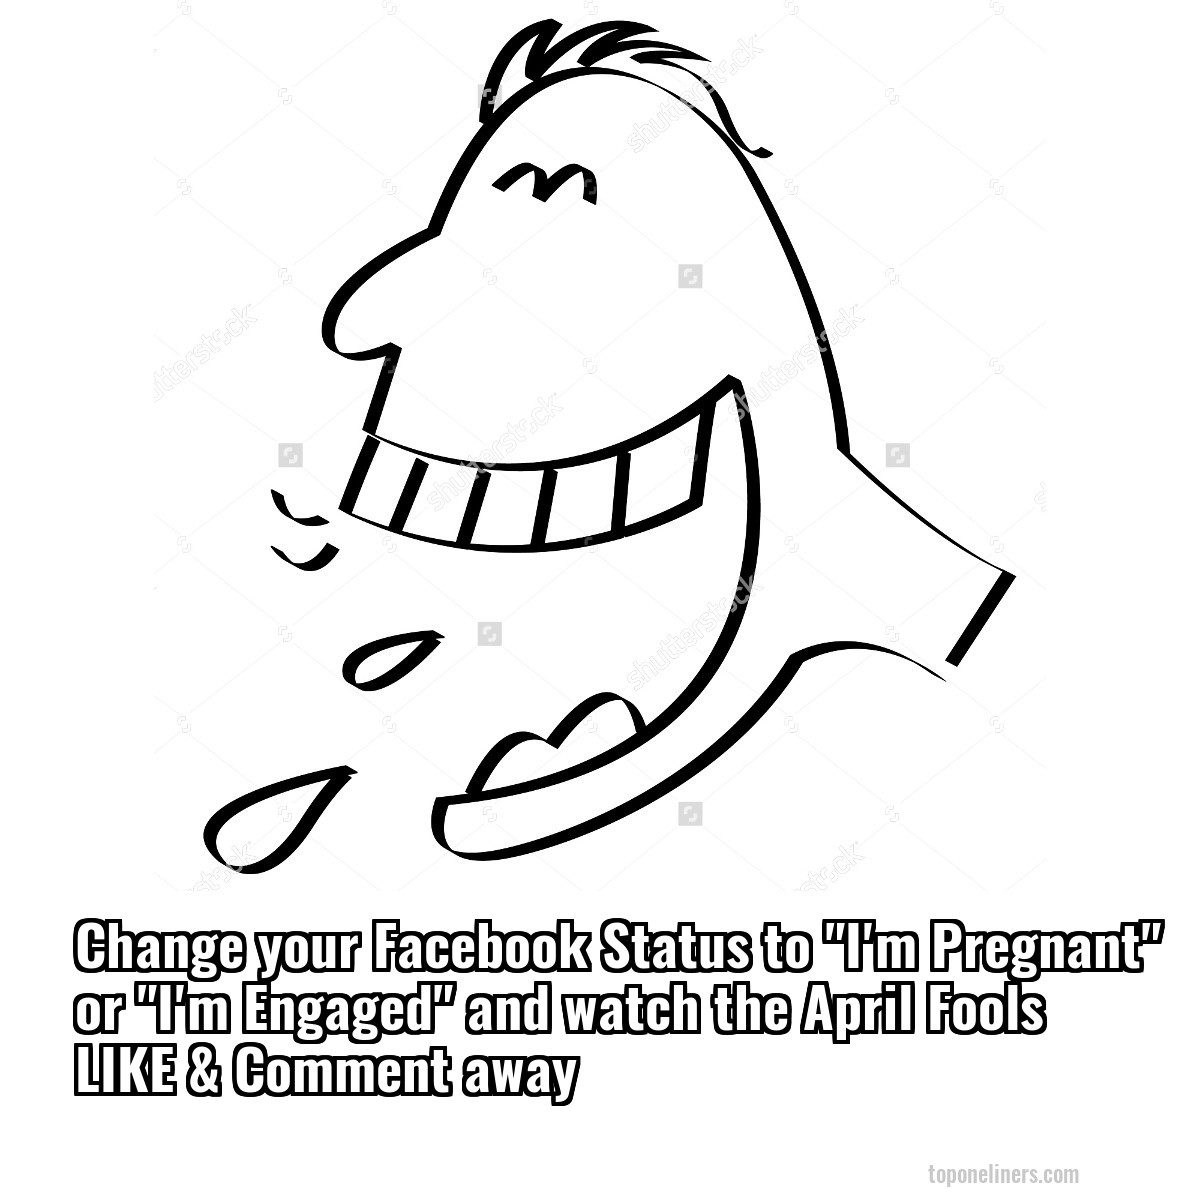 Change your Facebook Status to "I'm Pregnant" or "I'm Engaged" and watch the April Fools LIKE & Comment away
